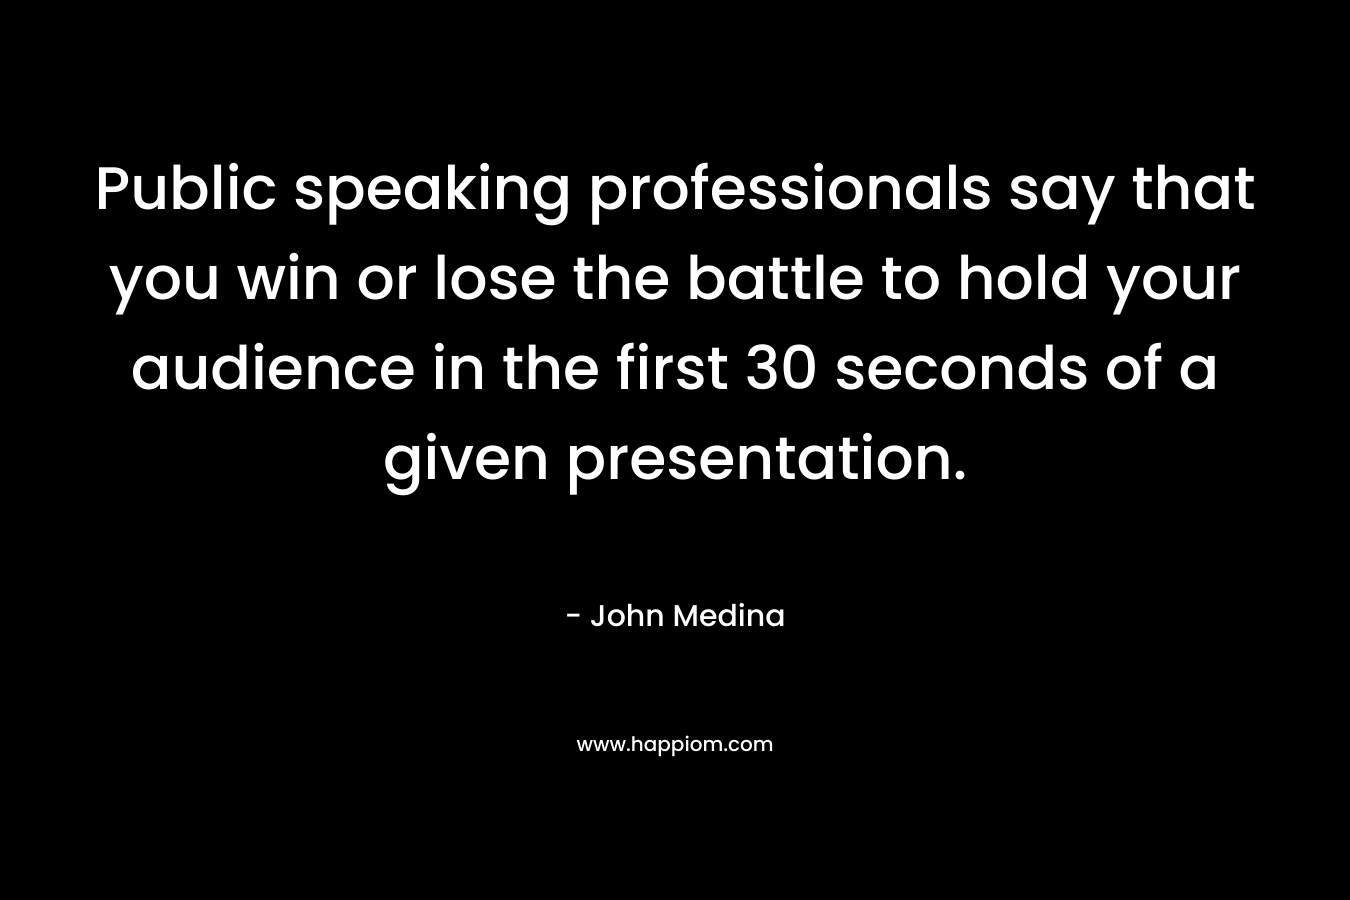 Public speaking professionals say that you win or lose the battle to hold your audience in the first 30 seconds of a given presentation. – John Medina